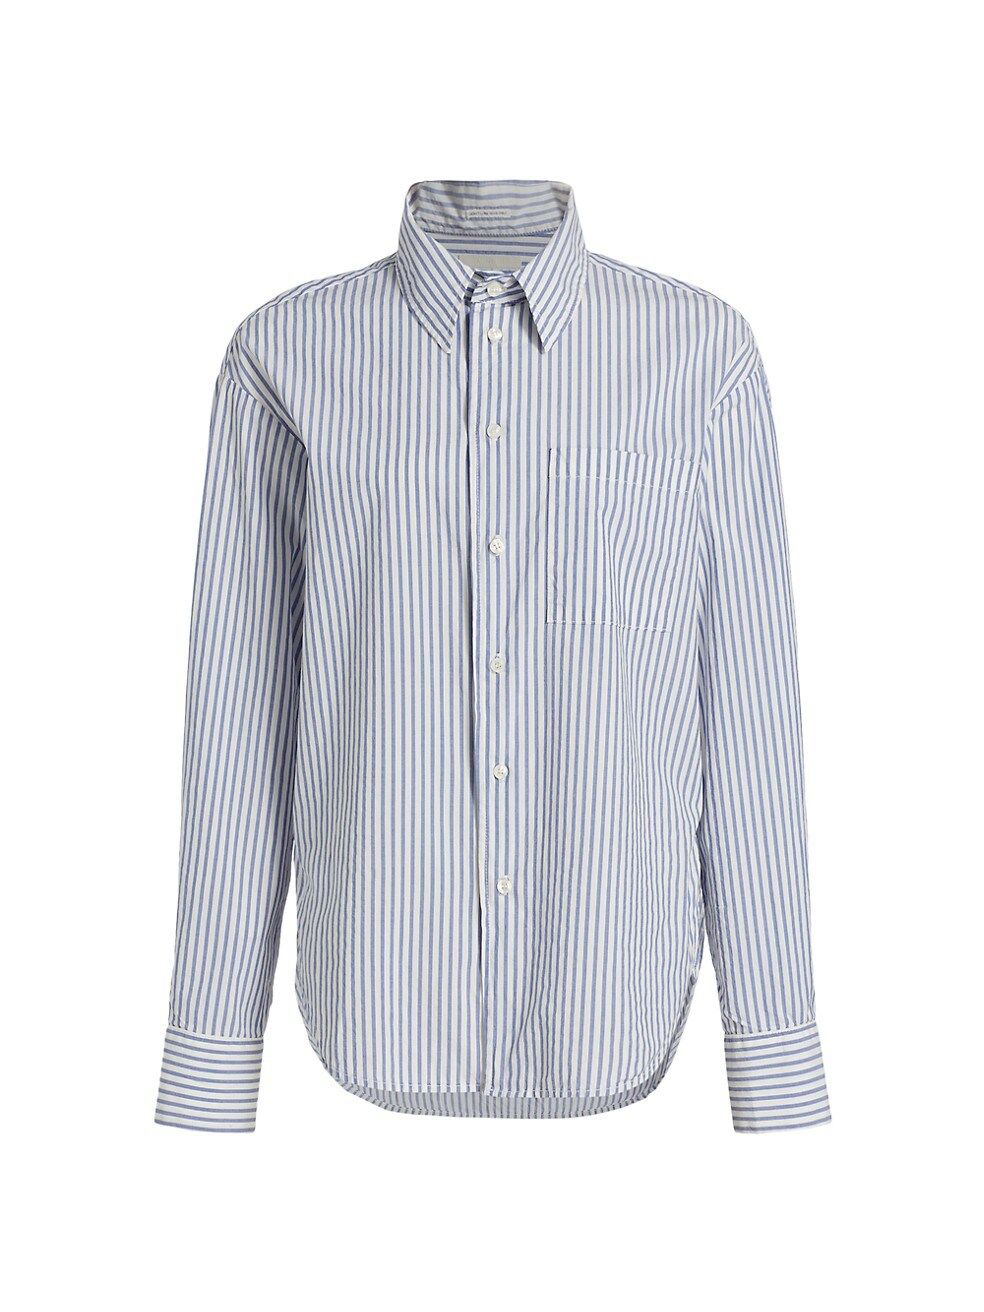 The Roomie Frenchie Stripe Button-Down Shirt | Saks Fifth Avenue